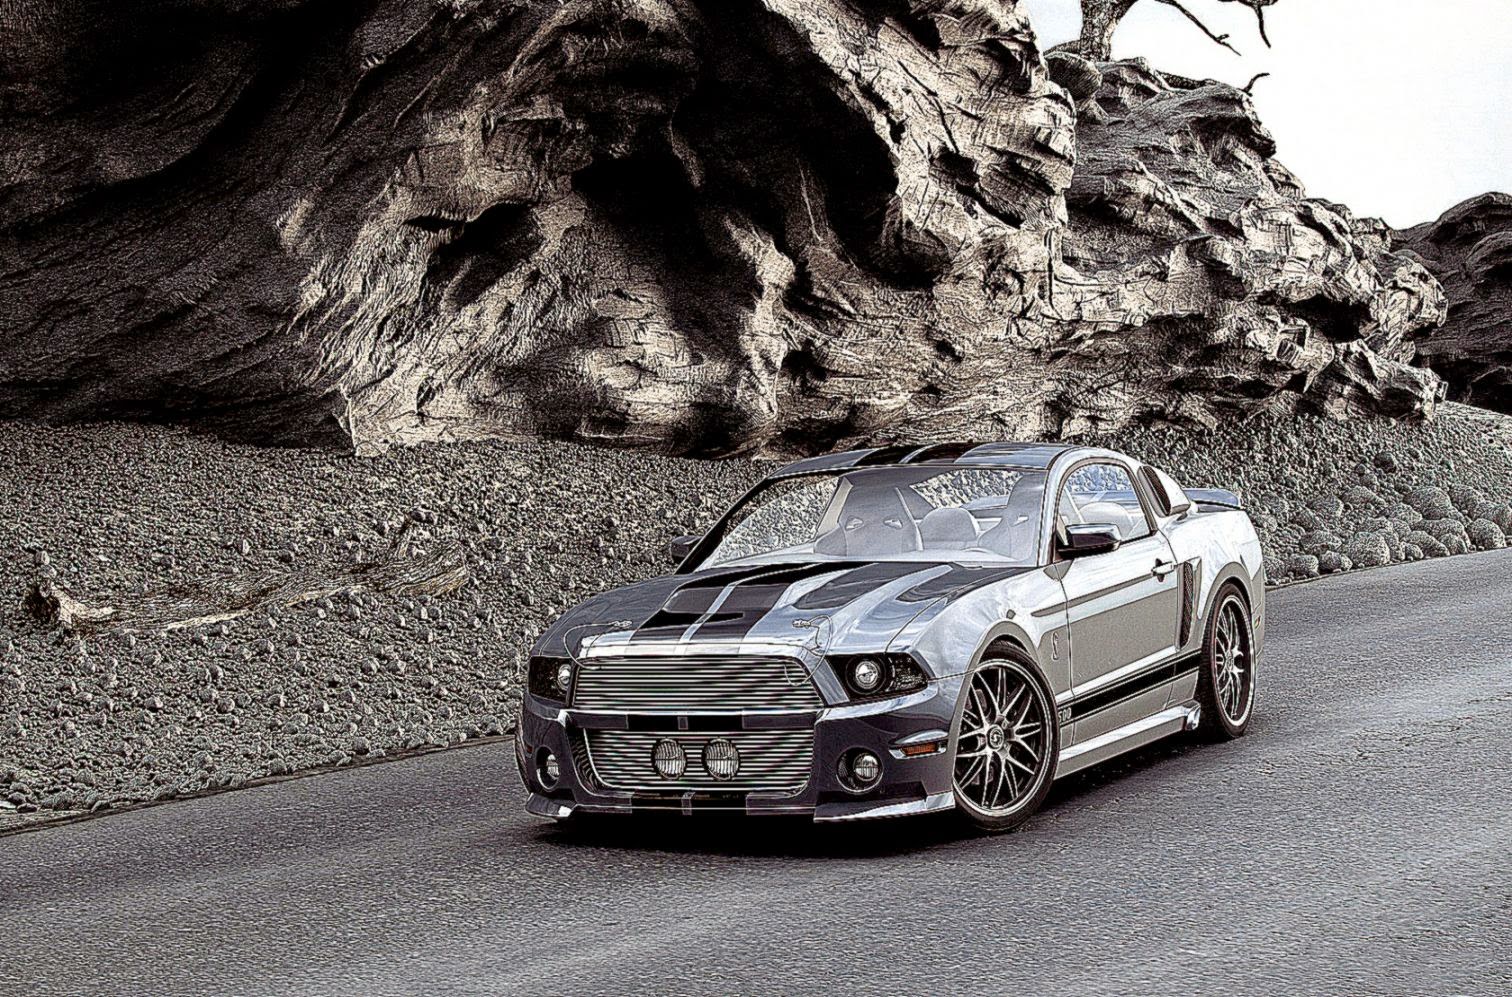 Ford Mustang Hd Wallpapers 1080P